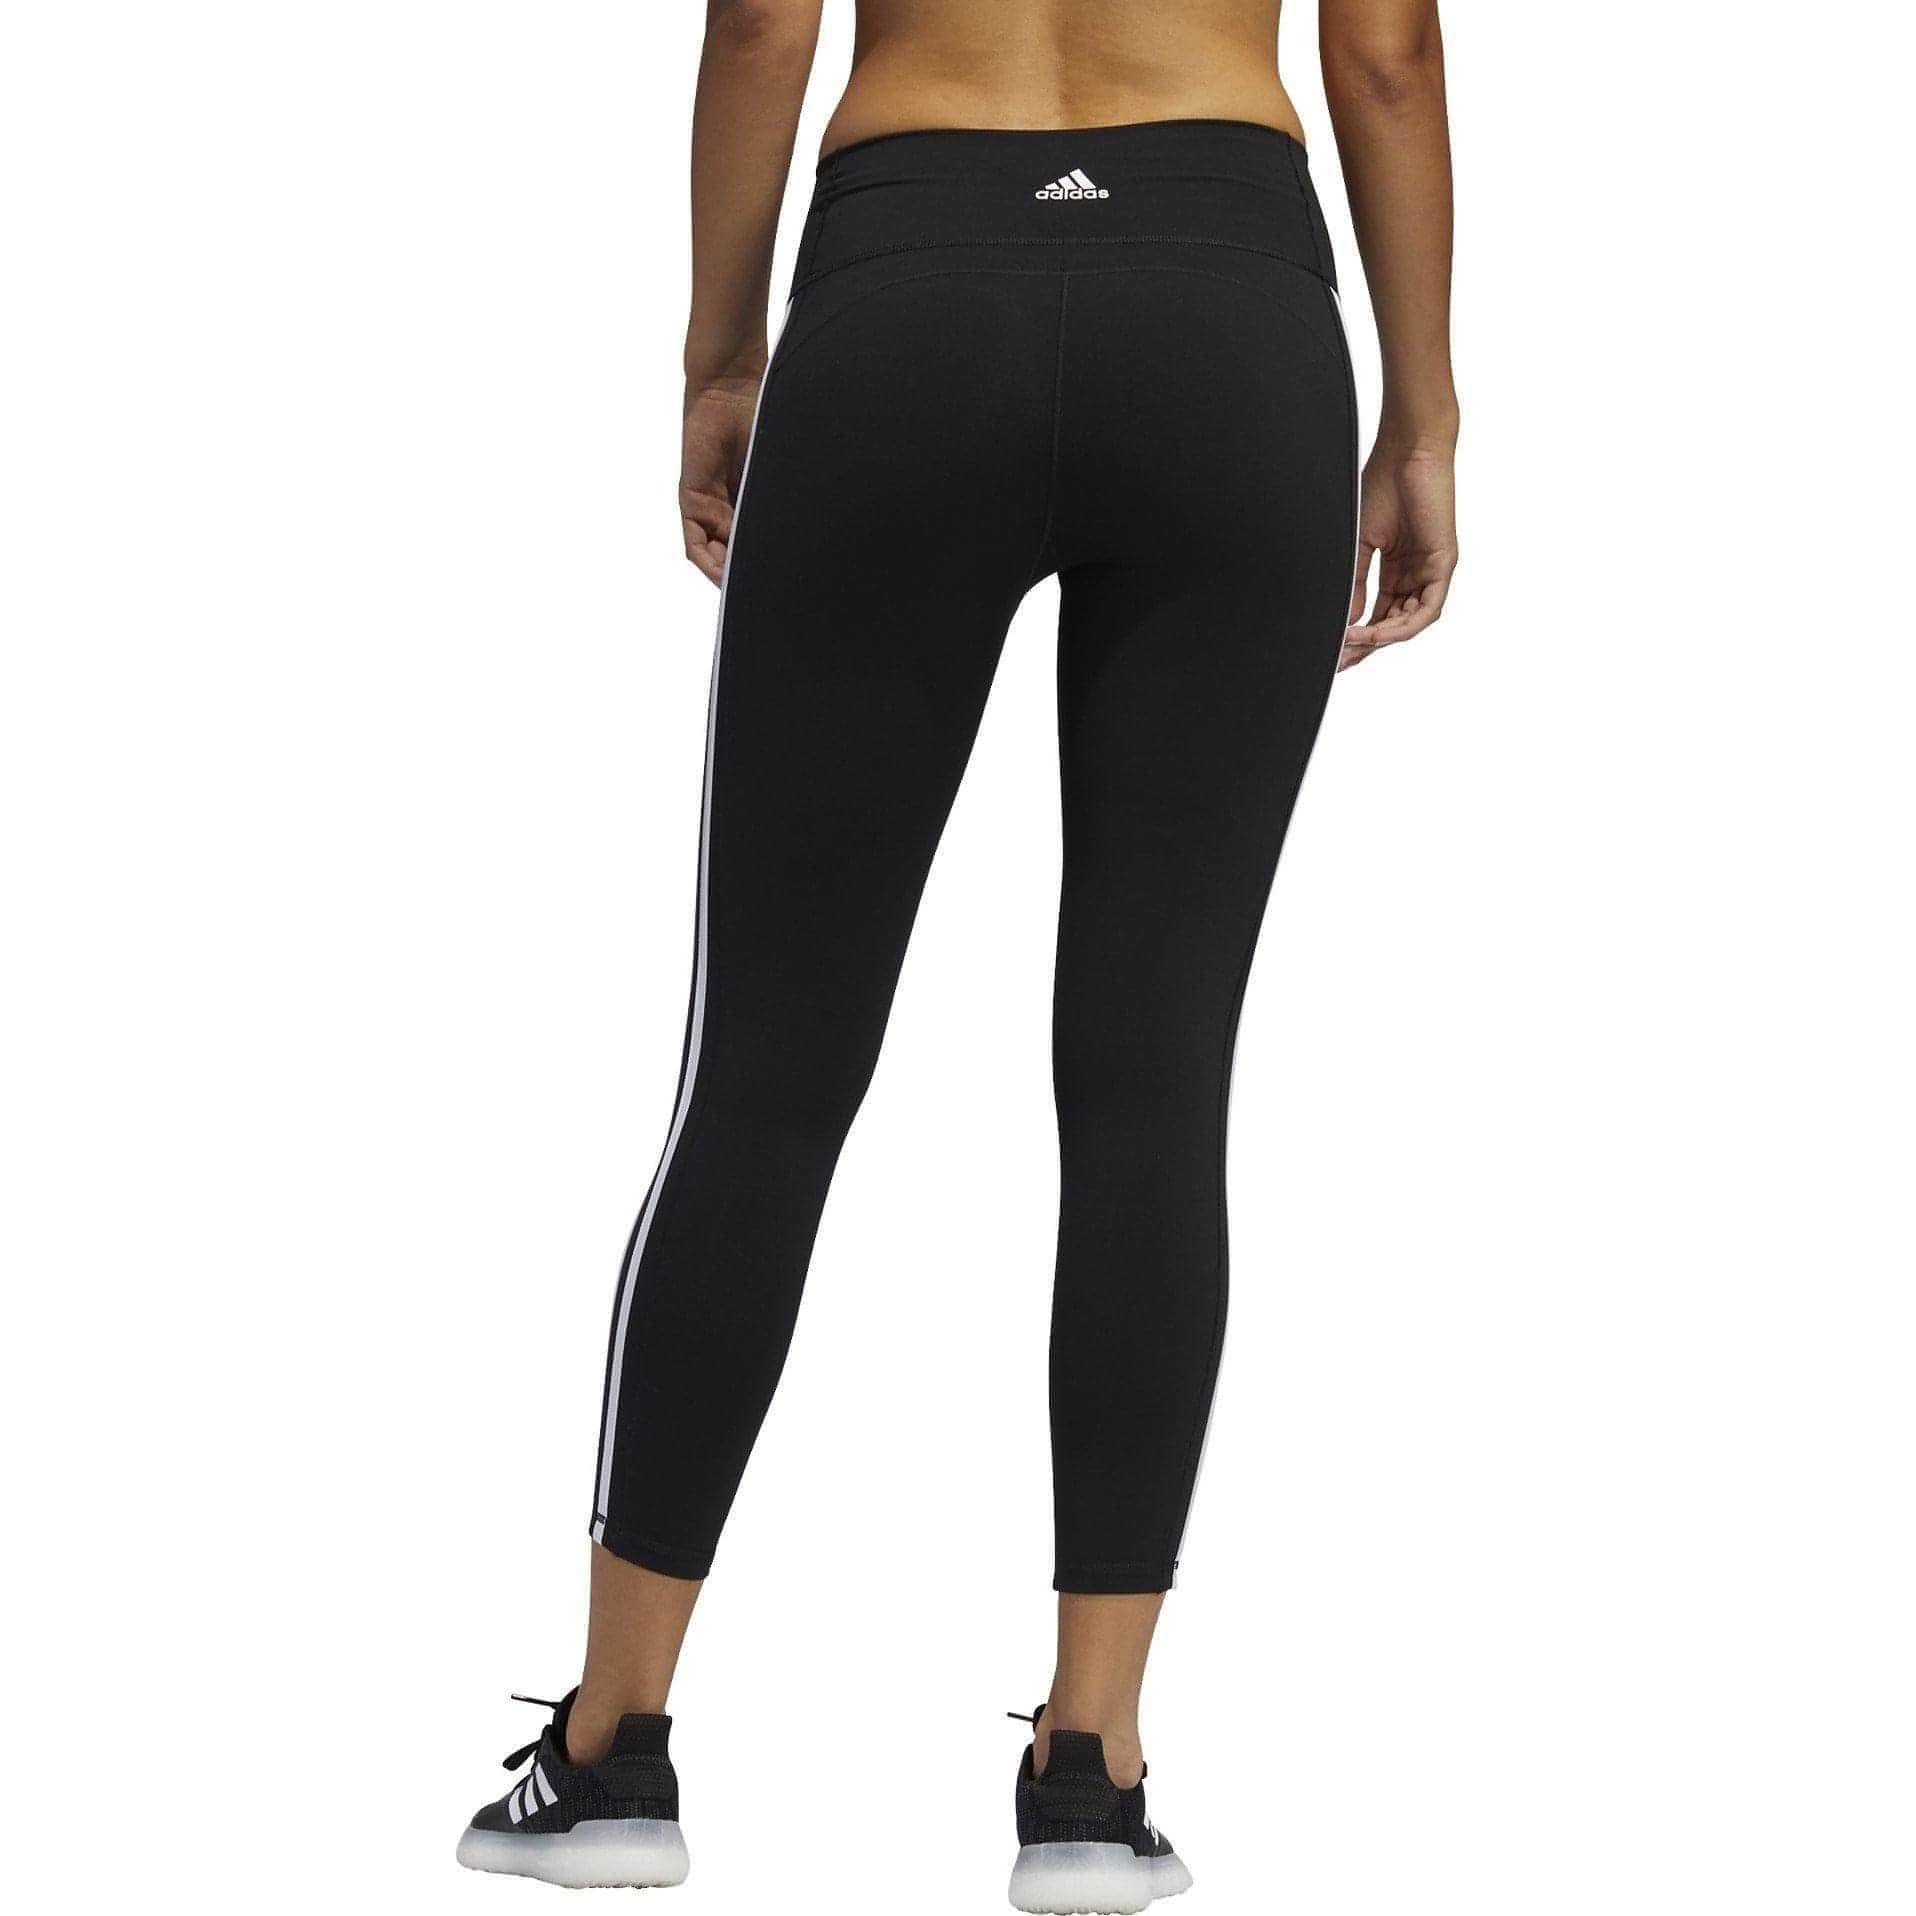 adidas Believe This 2.0 3 Stripes Womens 7/8 Training Tights - Black - Start Fitness